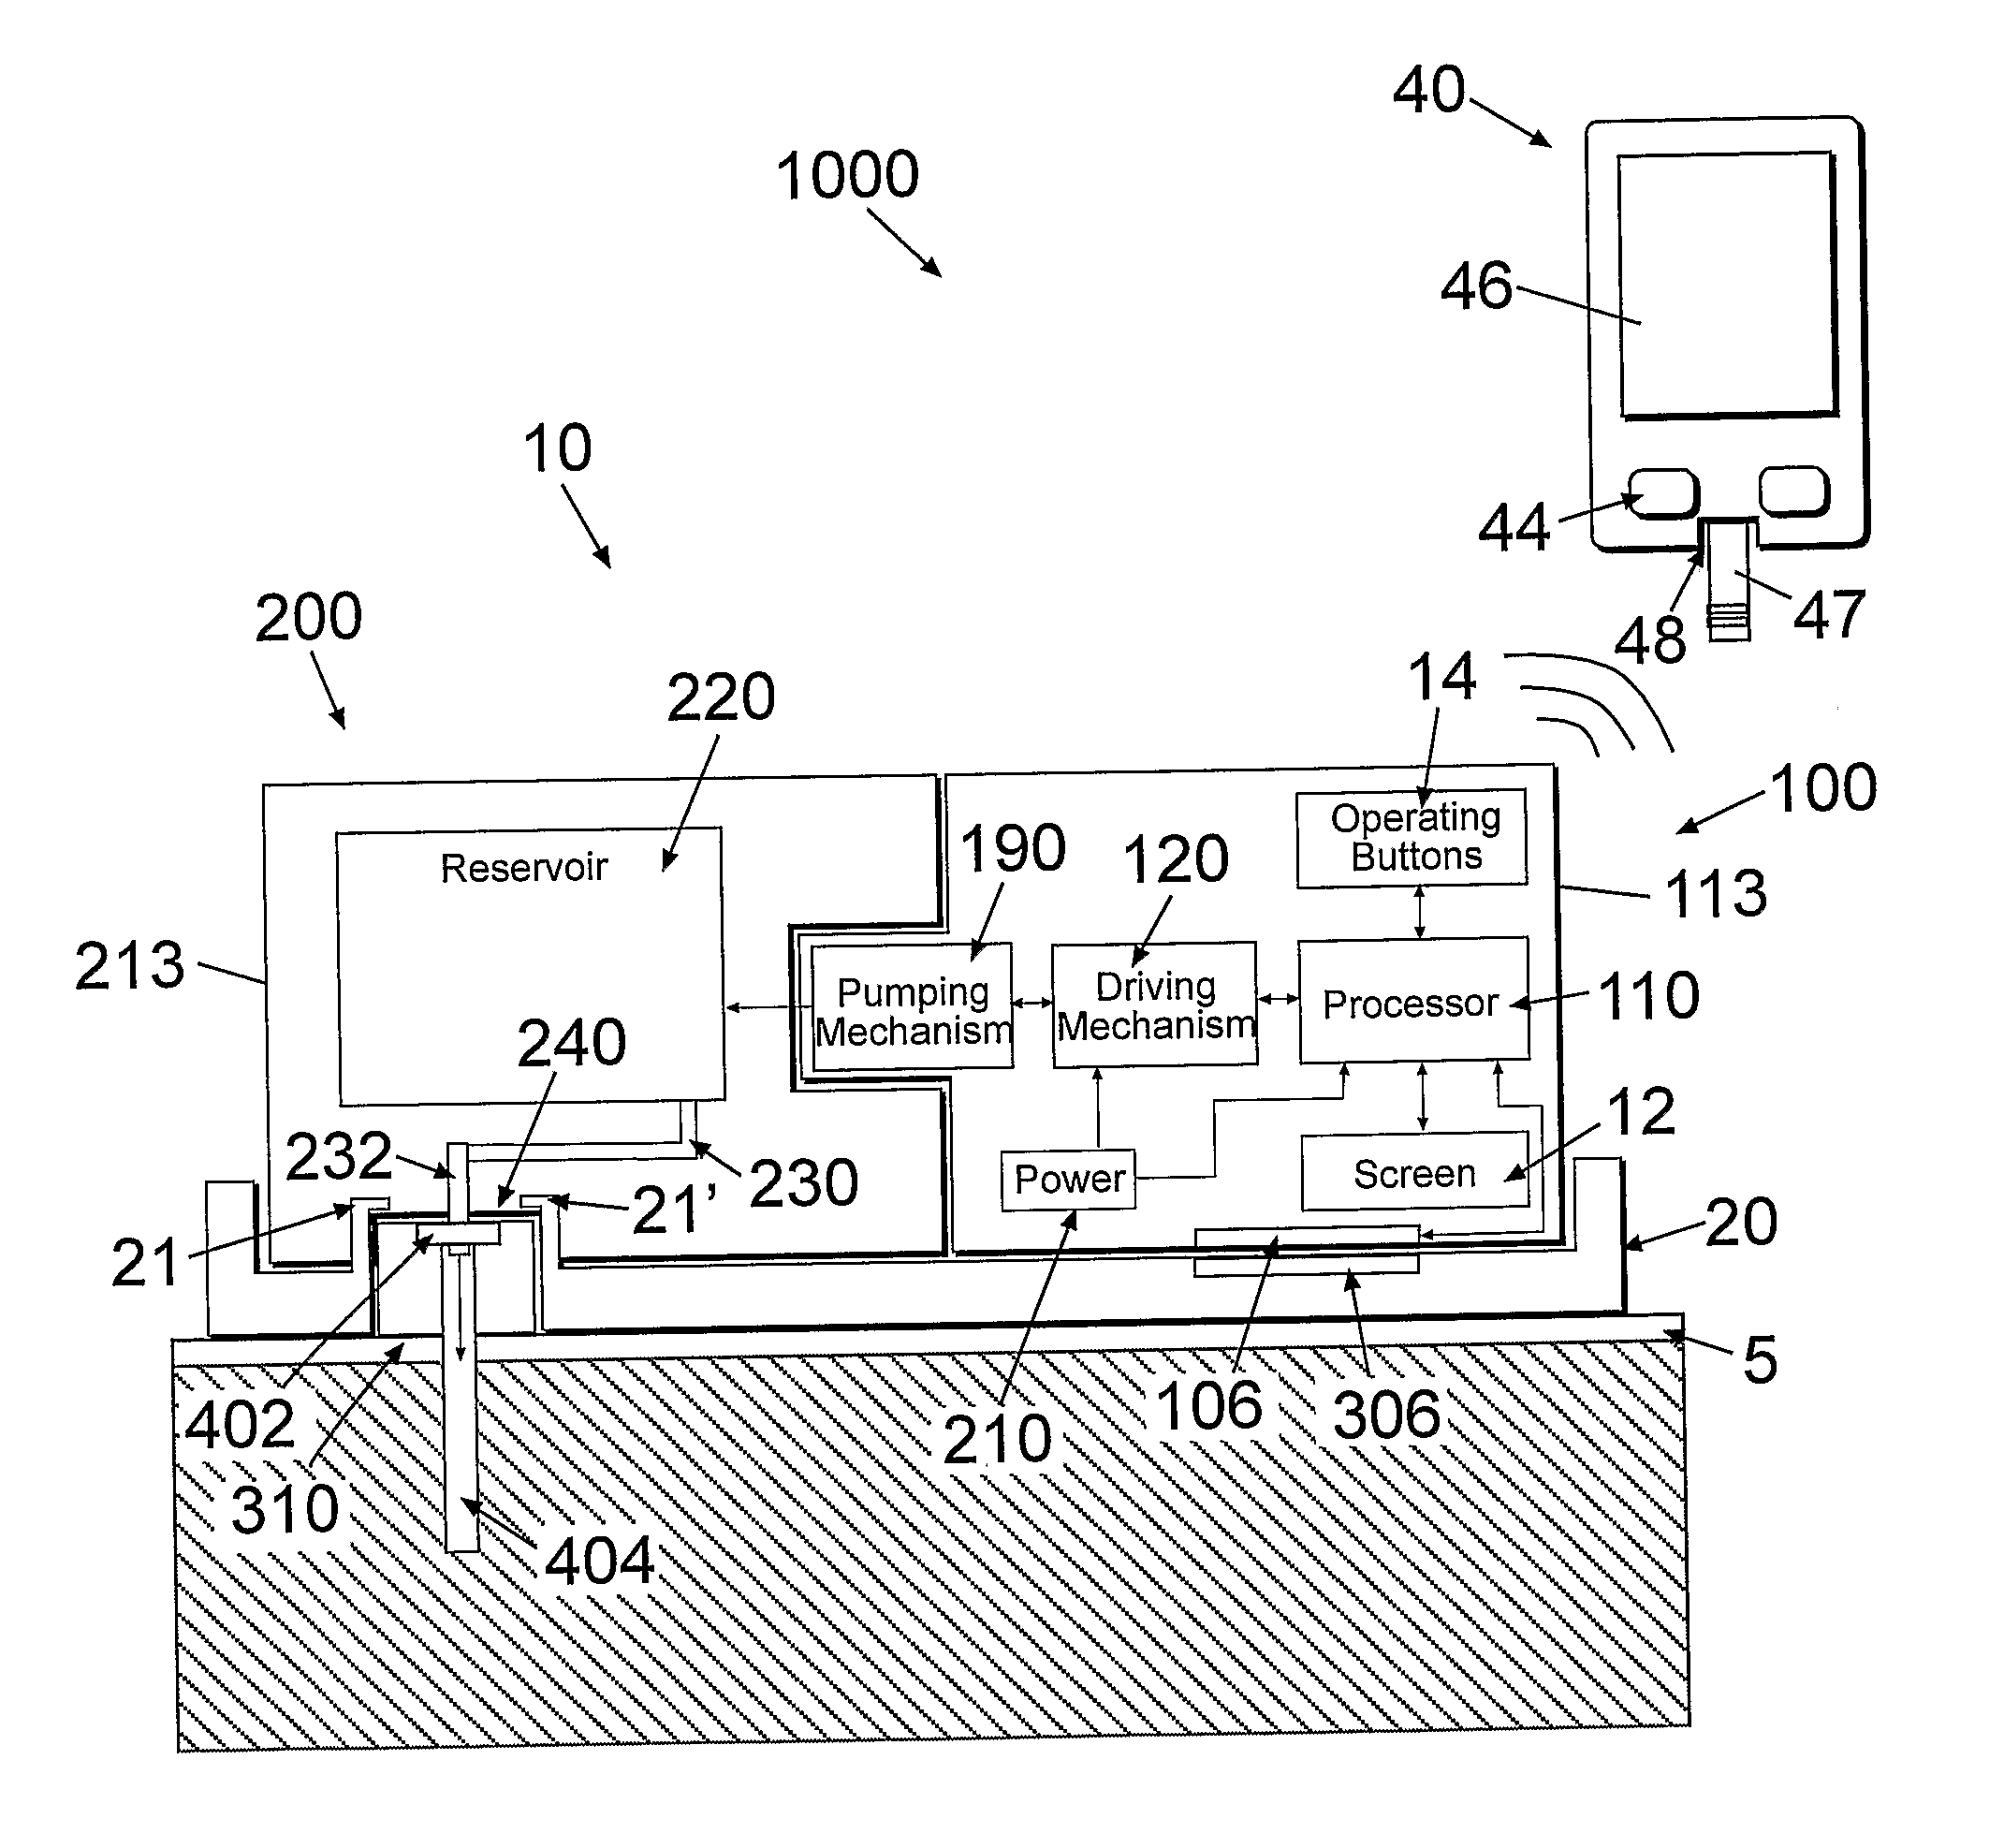 Portable infusion device with means for monitoring and controlling fluid delivery